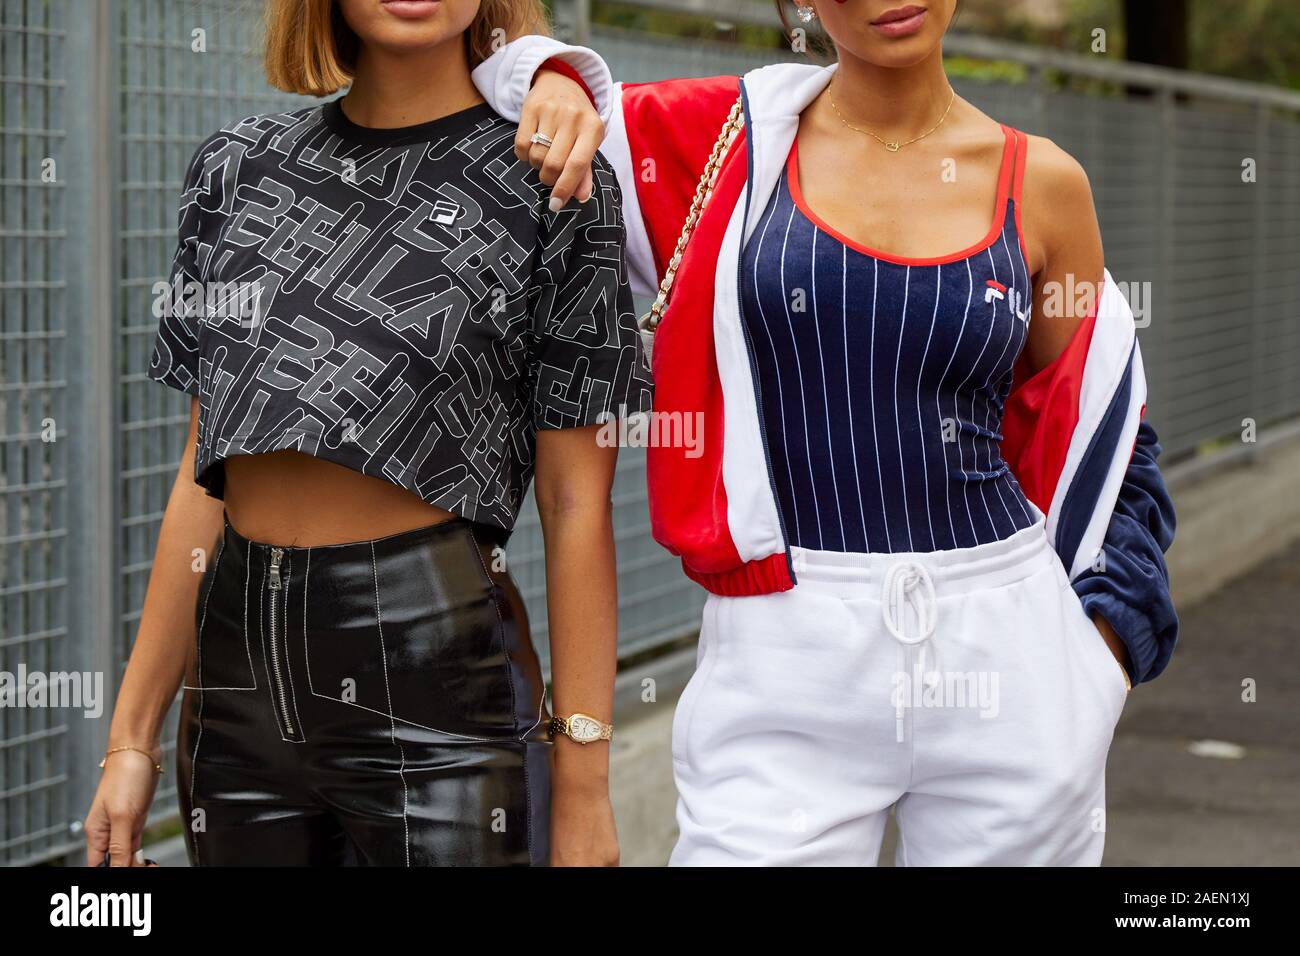 MILAN, ITALY - SEPTEMBER 22, 2019: Women with black shirt and blue and white striped shirt before Fila fashion show, Milan Fashion Week street style Stock Photo